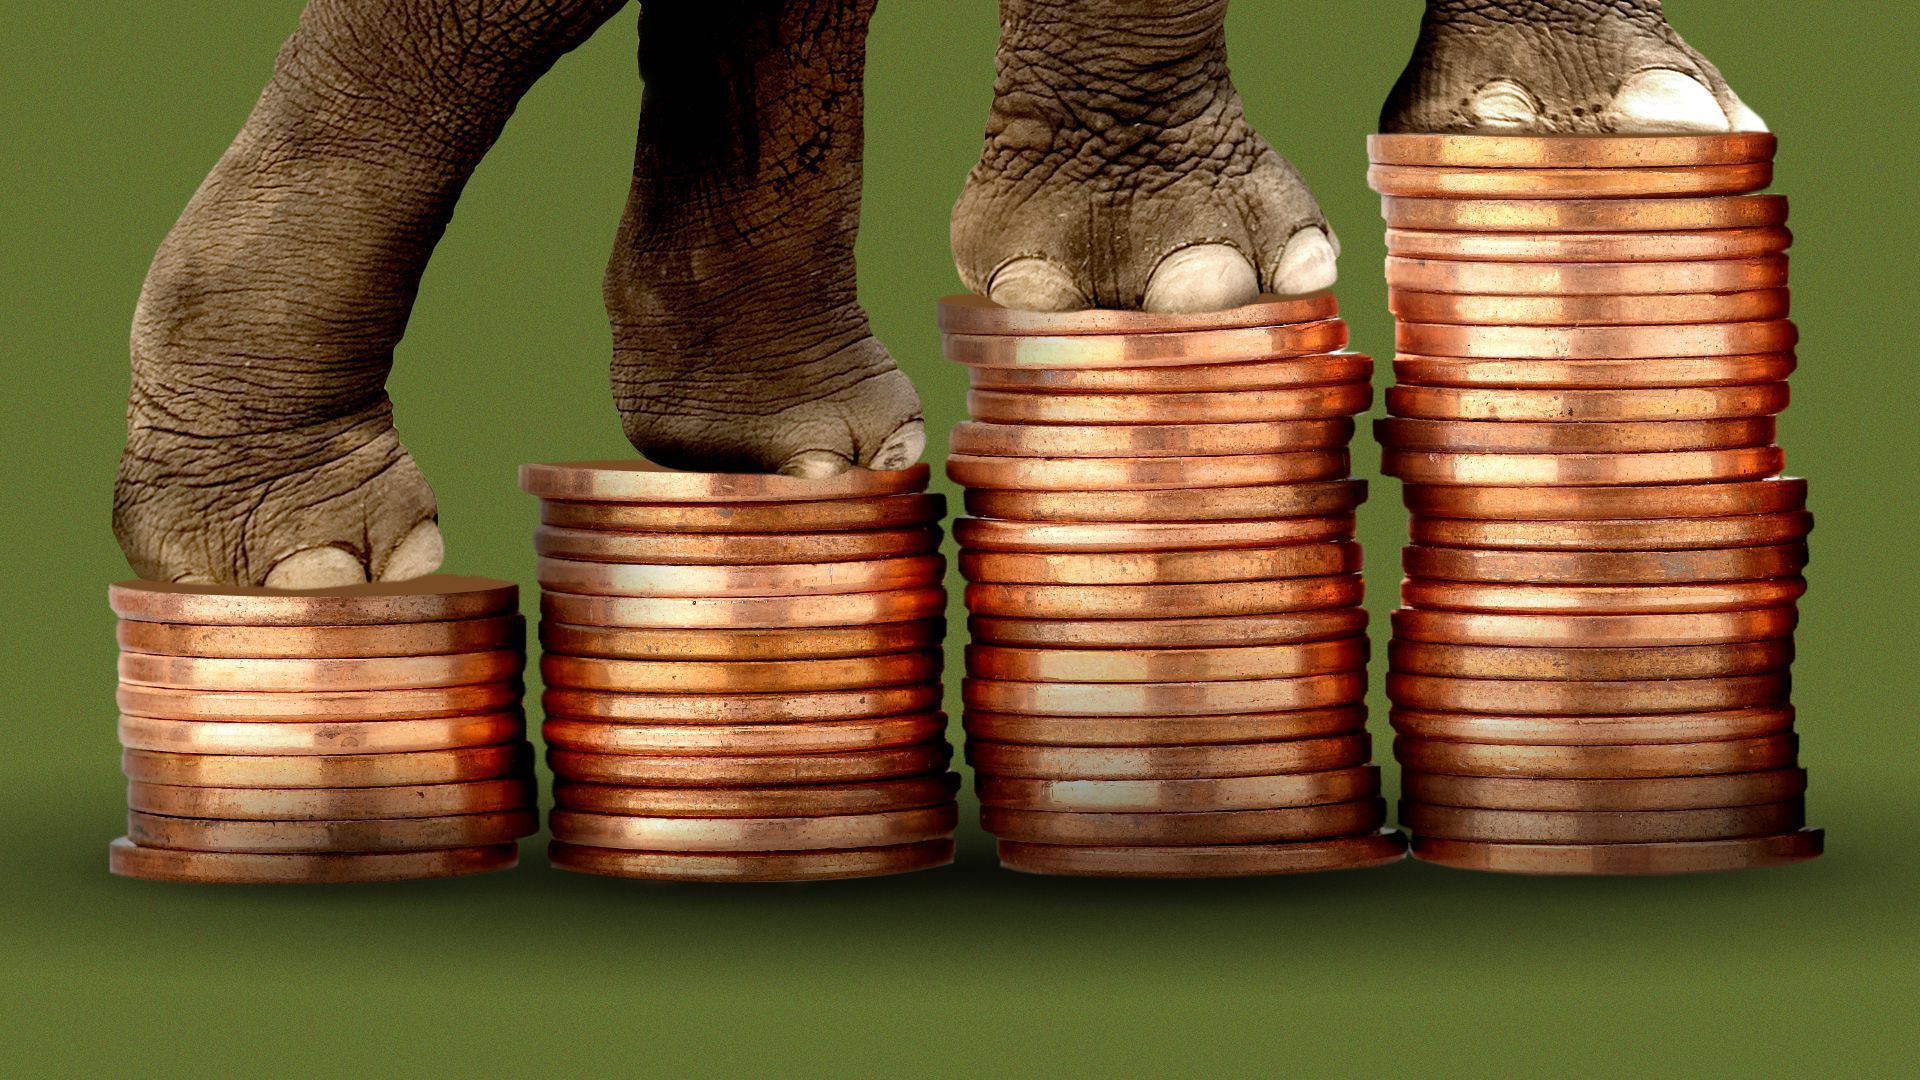 An illustration shows an elephant climbing increasingly high stacks of pennies.